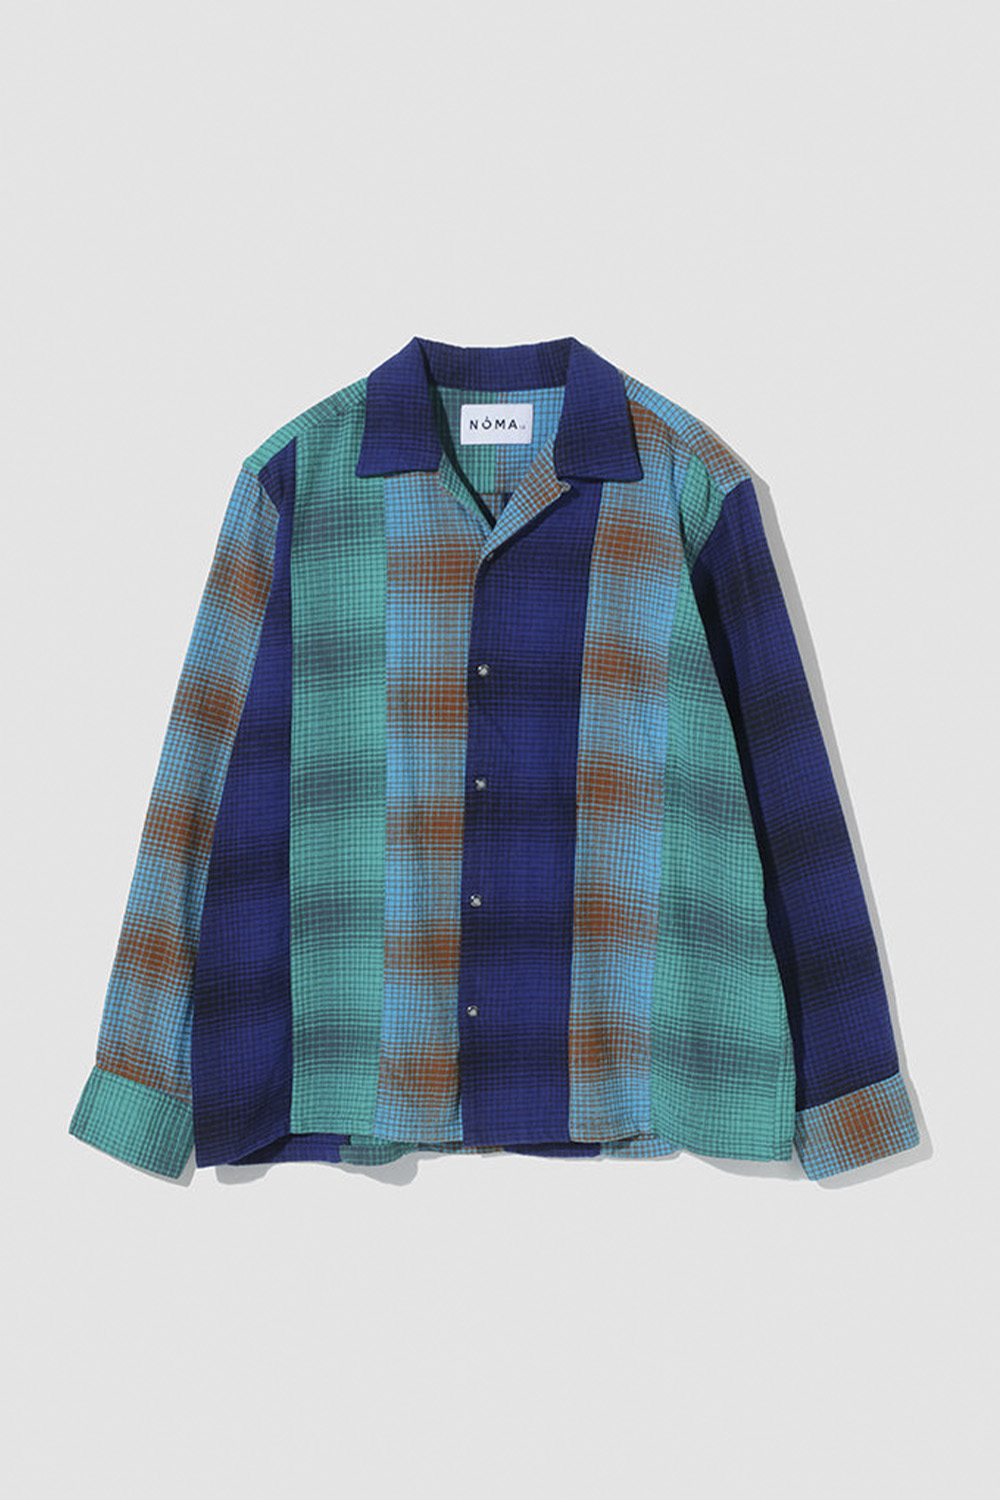 NOMA t.d. N Ombre Plaid Patchwork Shirt Navy/emerld/water